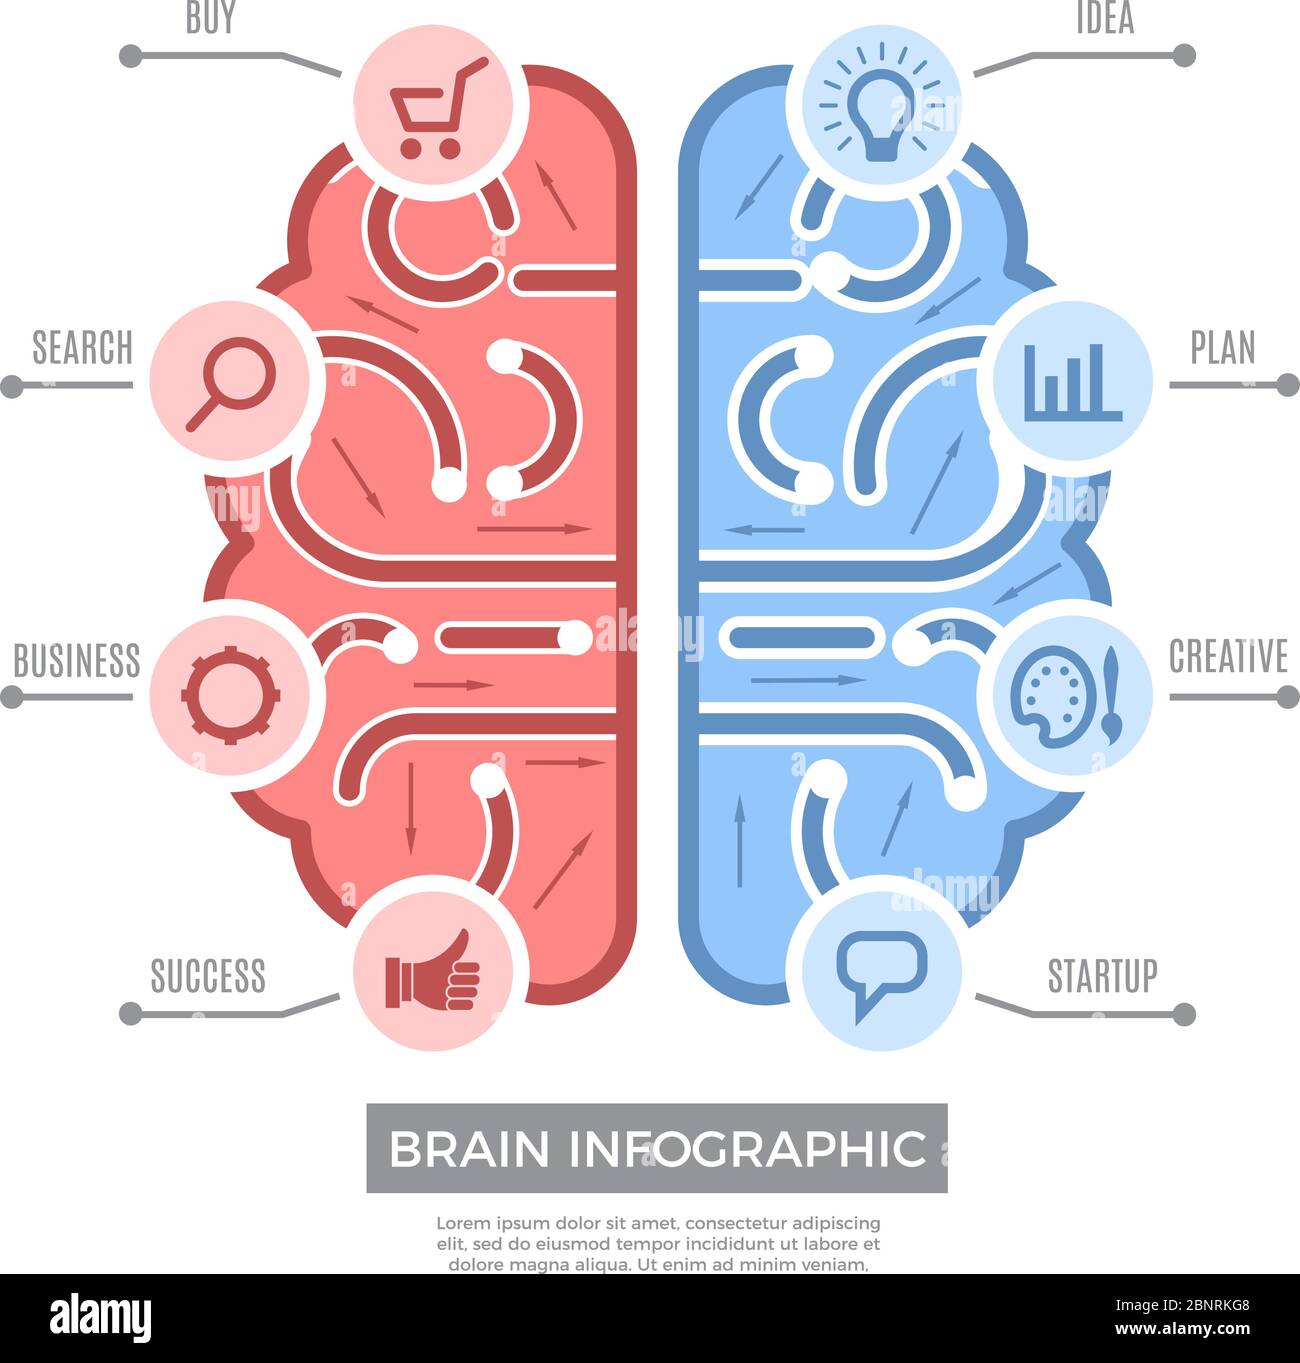 Brain infographic. Conceptual thinking learning symbols vector creative business pictures with place for text Stock Vector